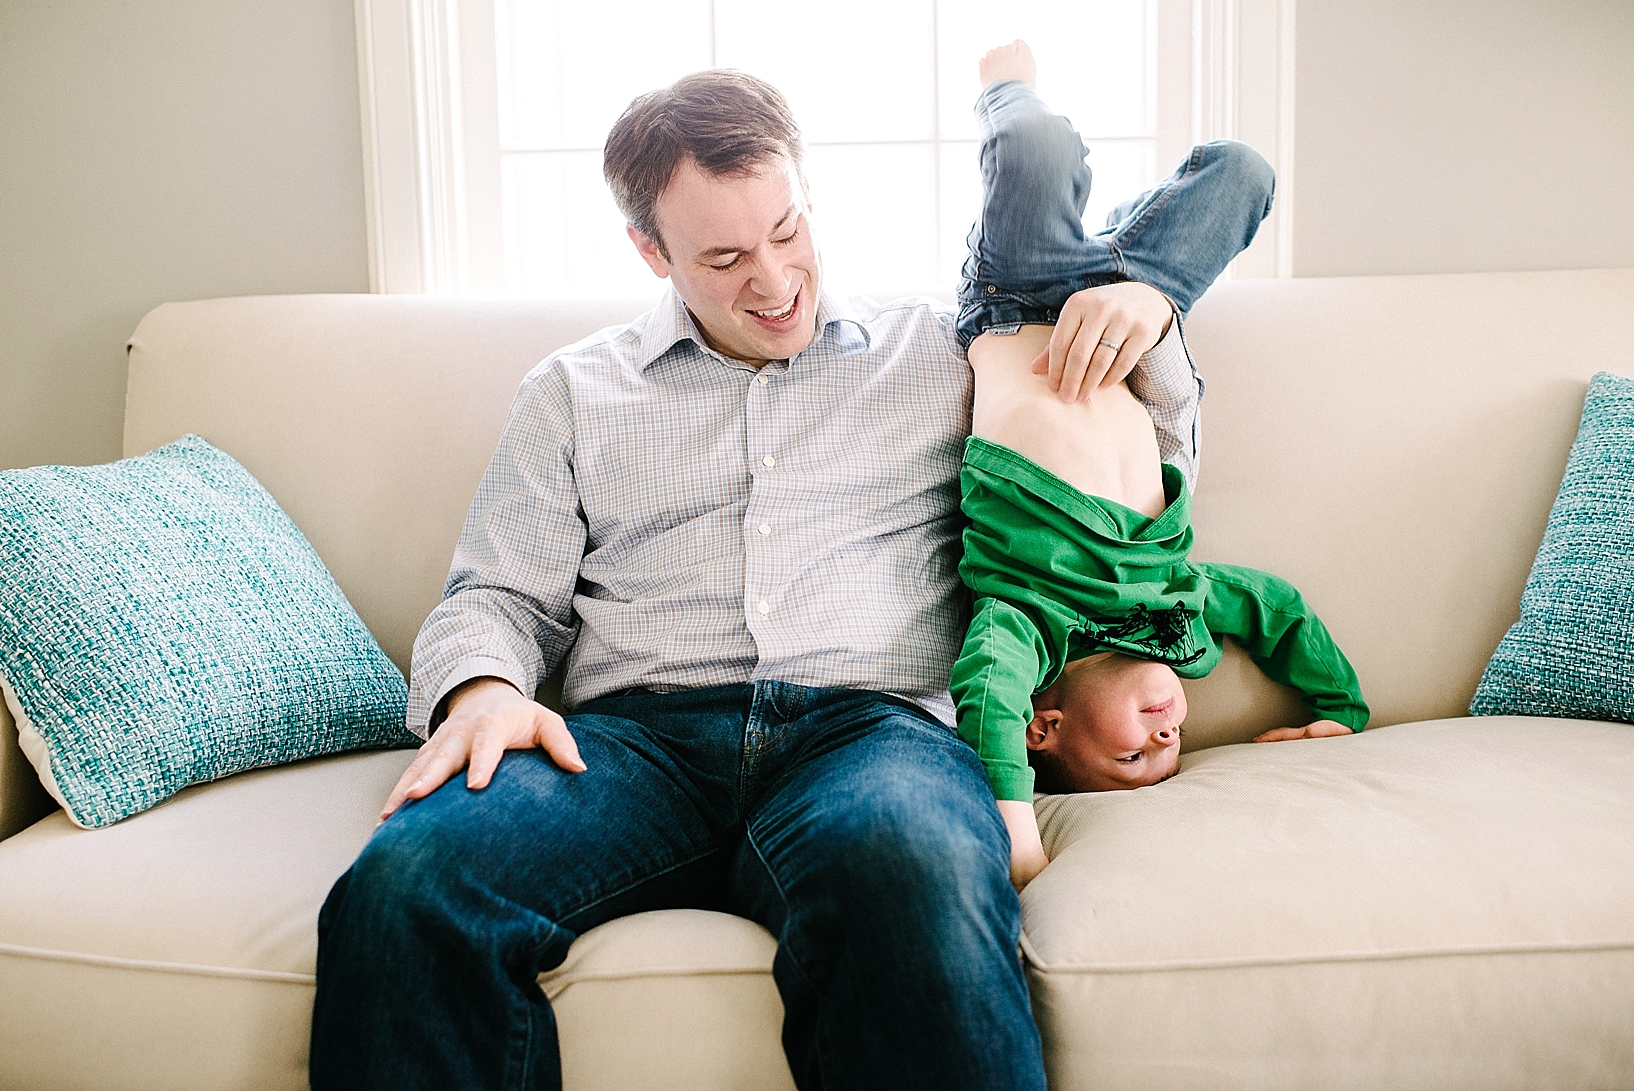 dad sitting on couch with son upside down next to him